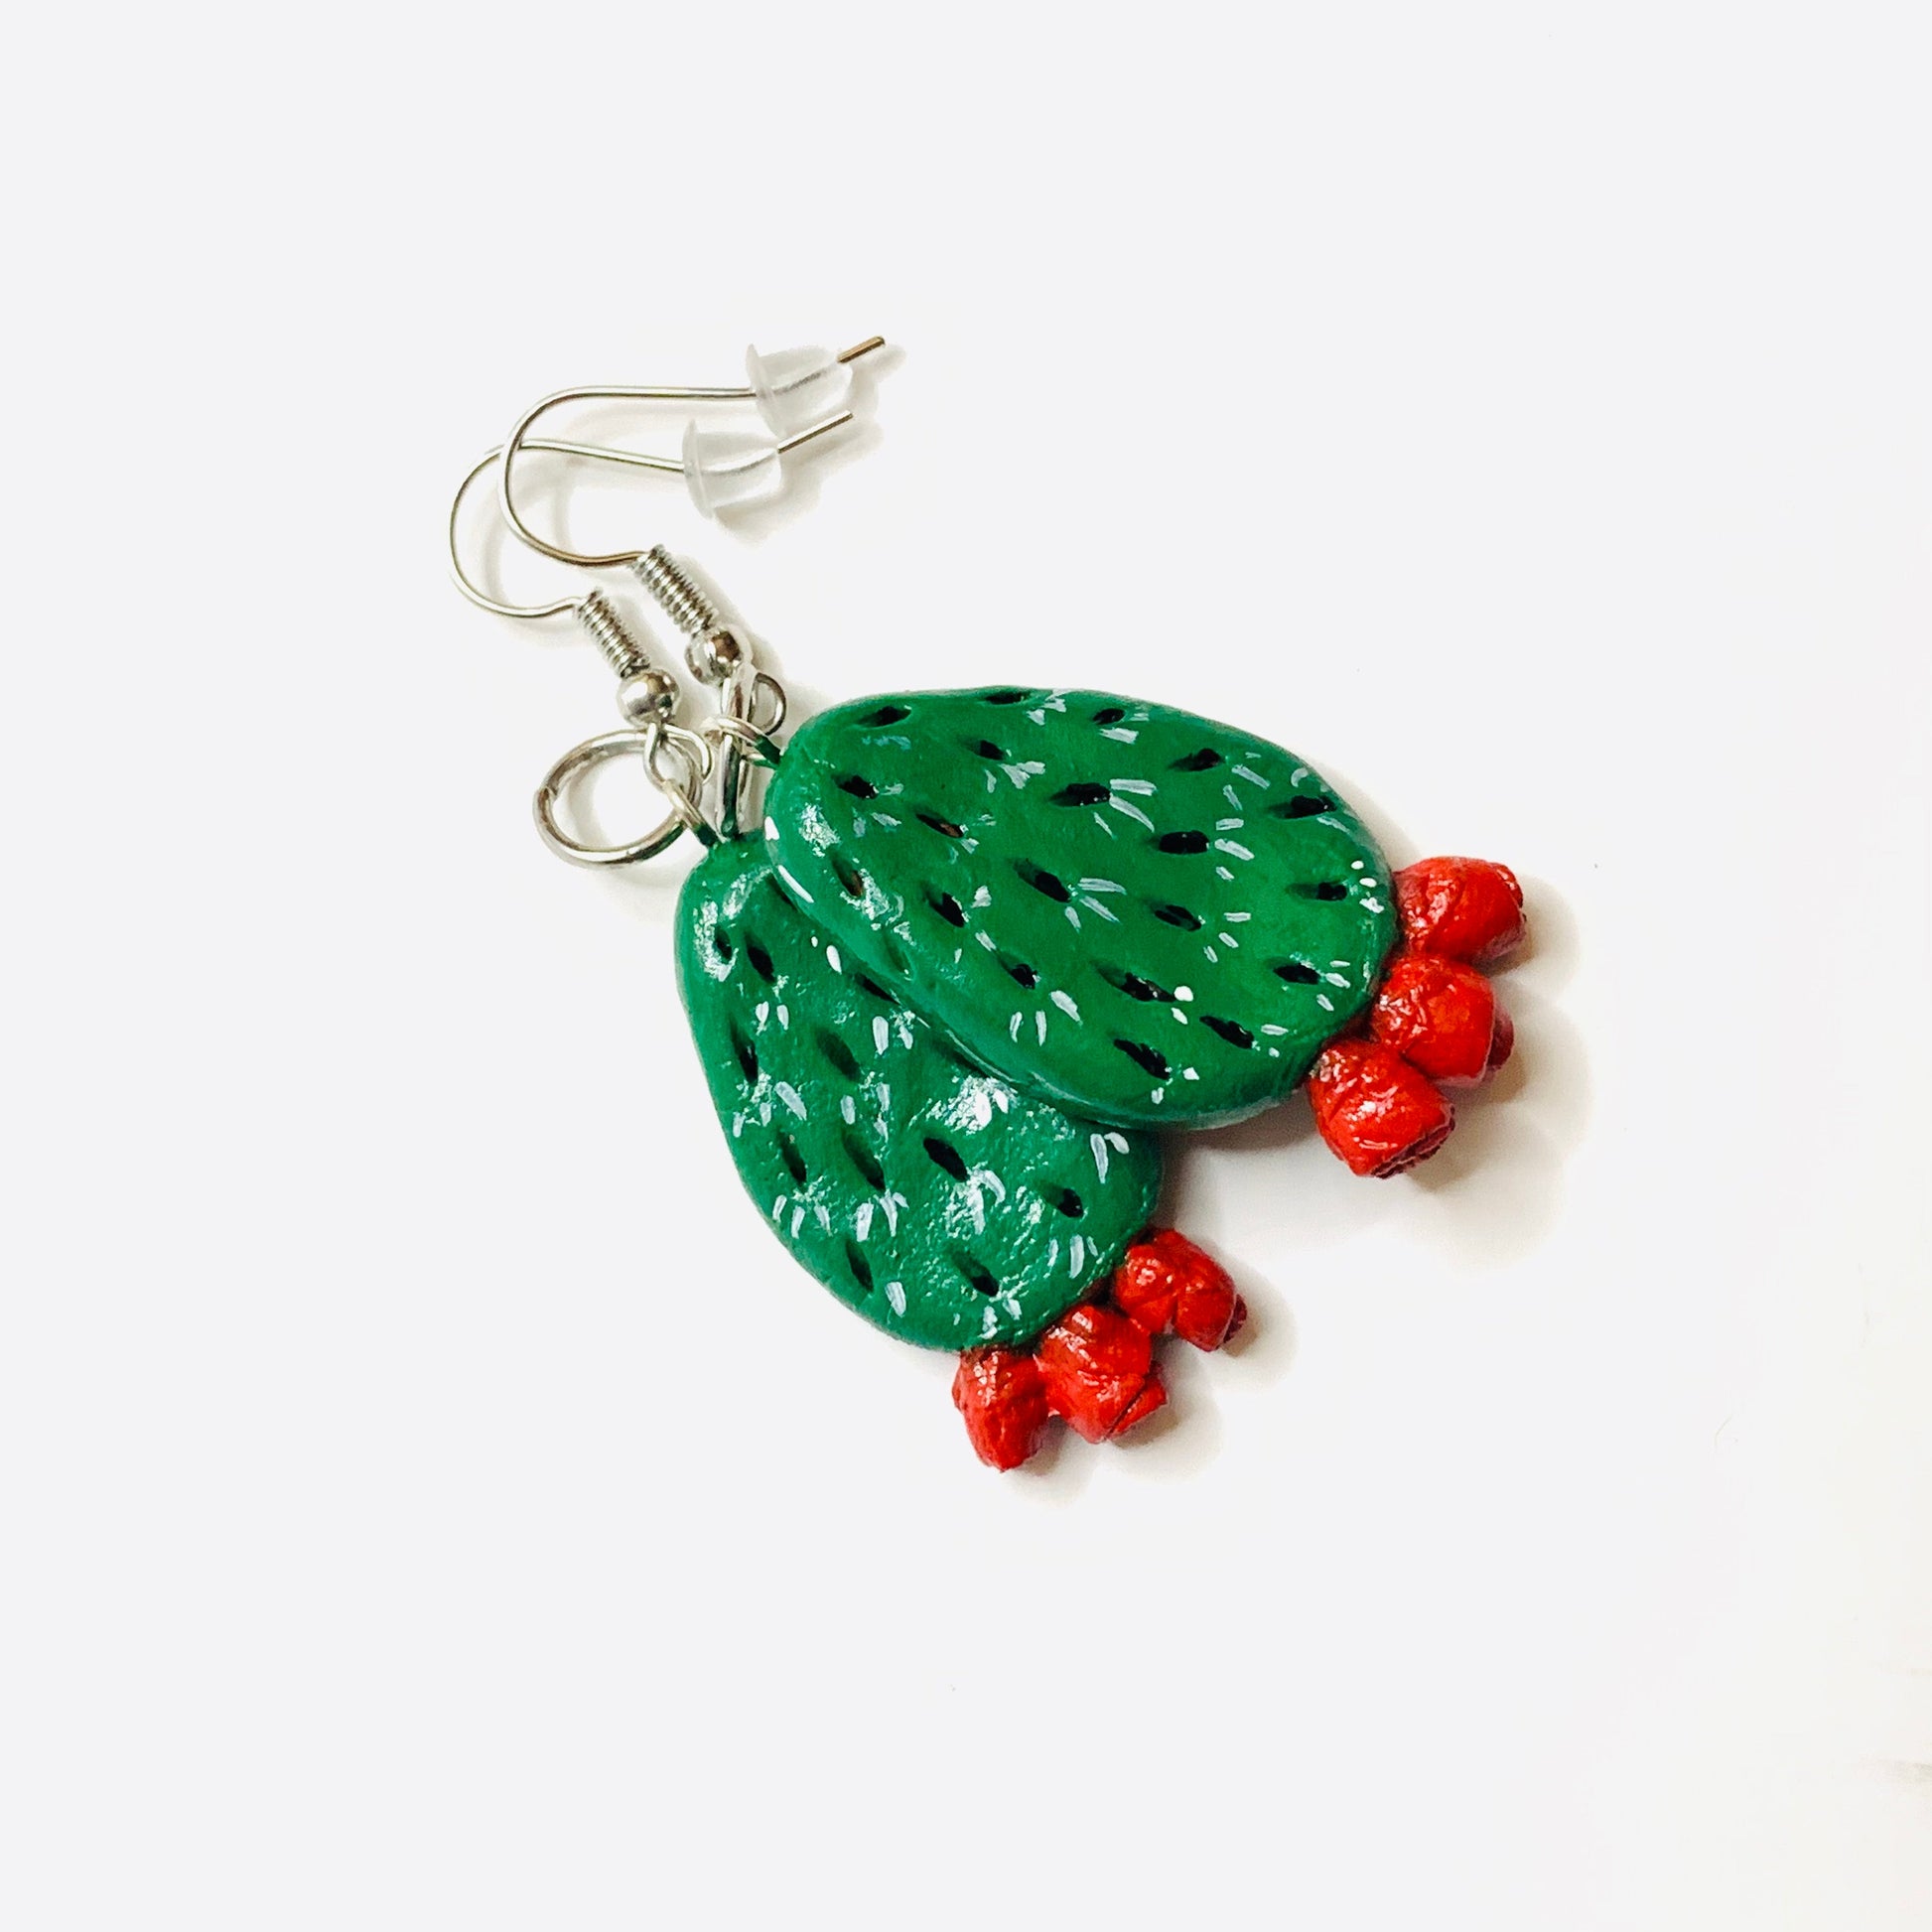 Glamorous Carved Cactus Earrings Clay Jewelry Mexico Red Flowers Folk ArtWear Fashion Summer Girls Women Gift Aretes Nopales Mujer Claywelry